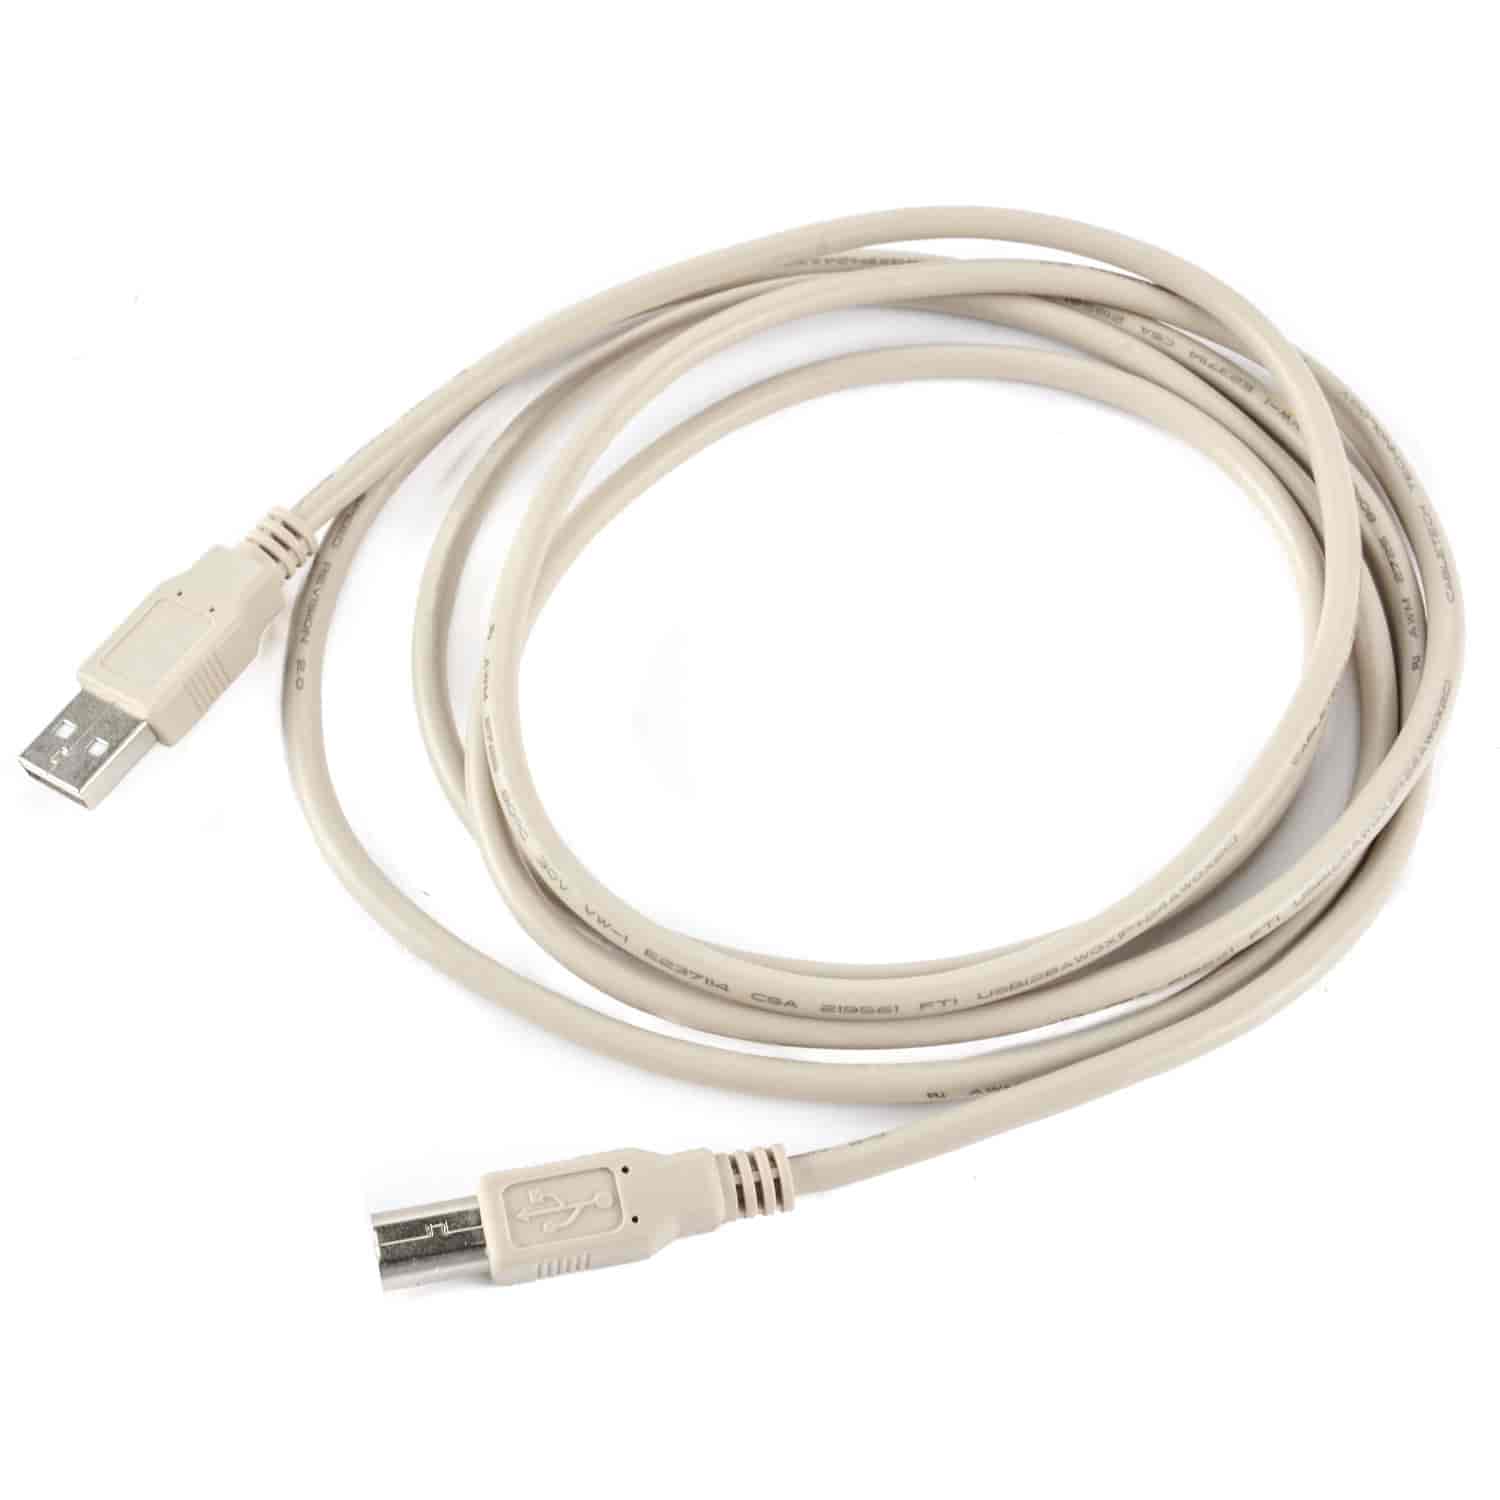 USB Cable Download Saved Runs to PC for Storage & Analysis